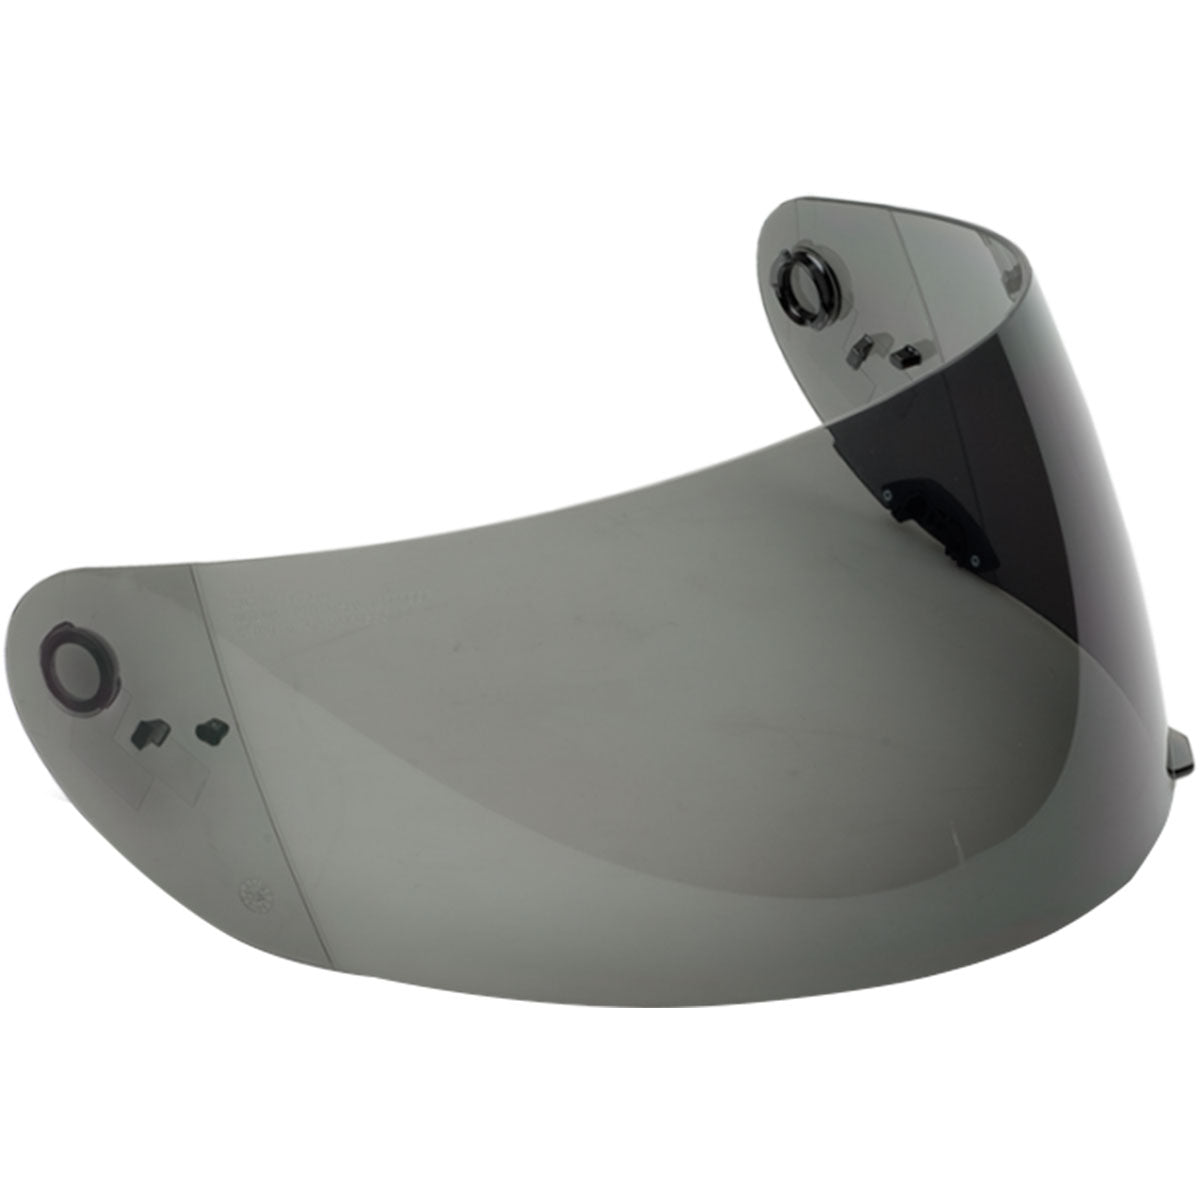 Bell Click Release Face Shield Helmet Accessories-2010058